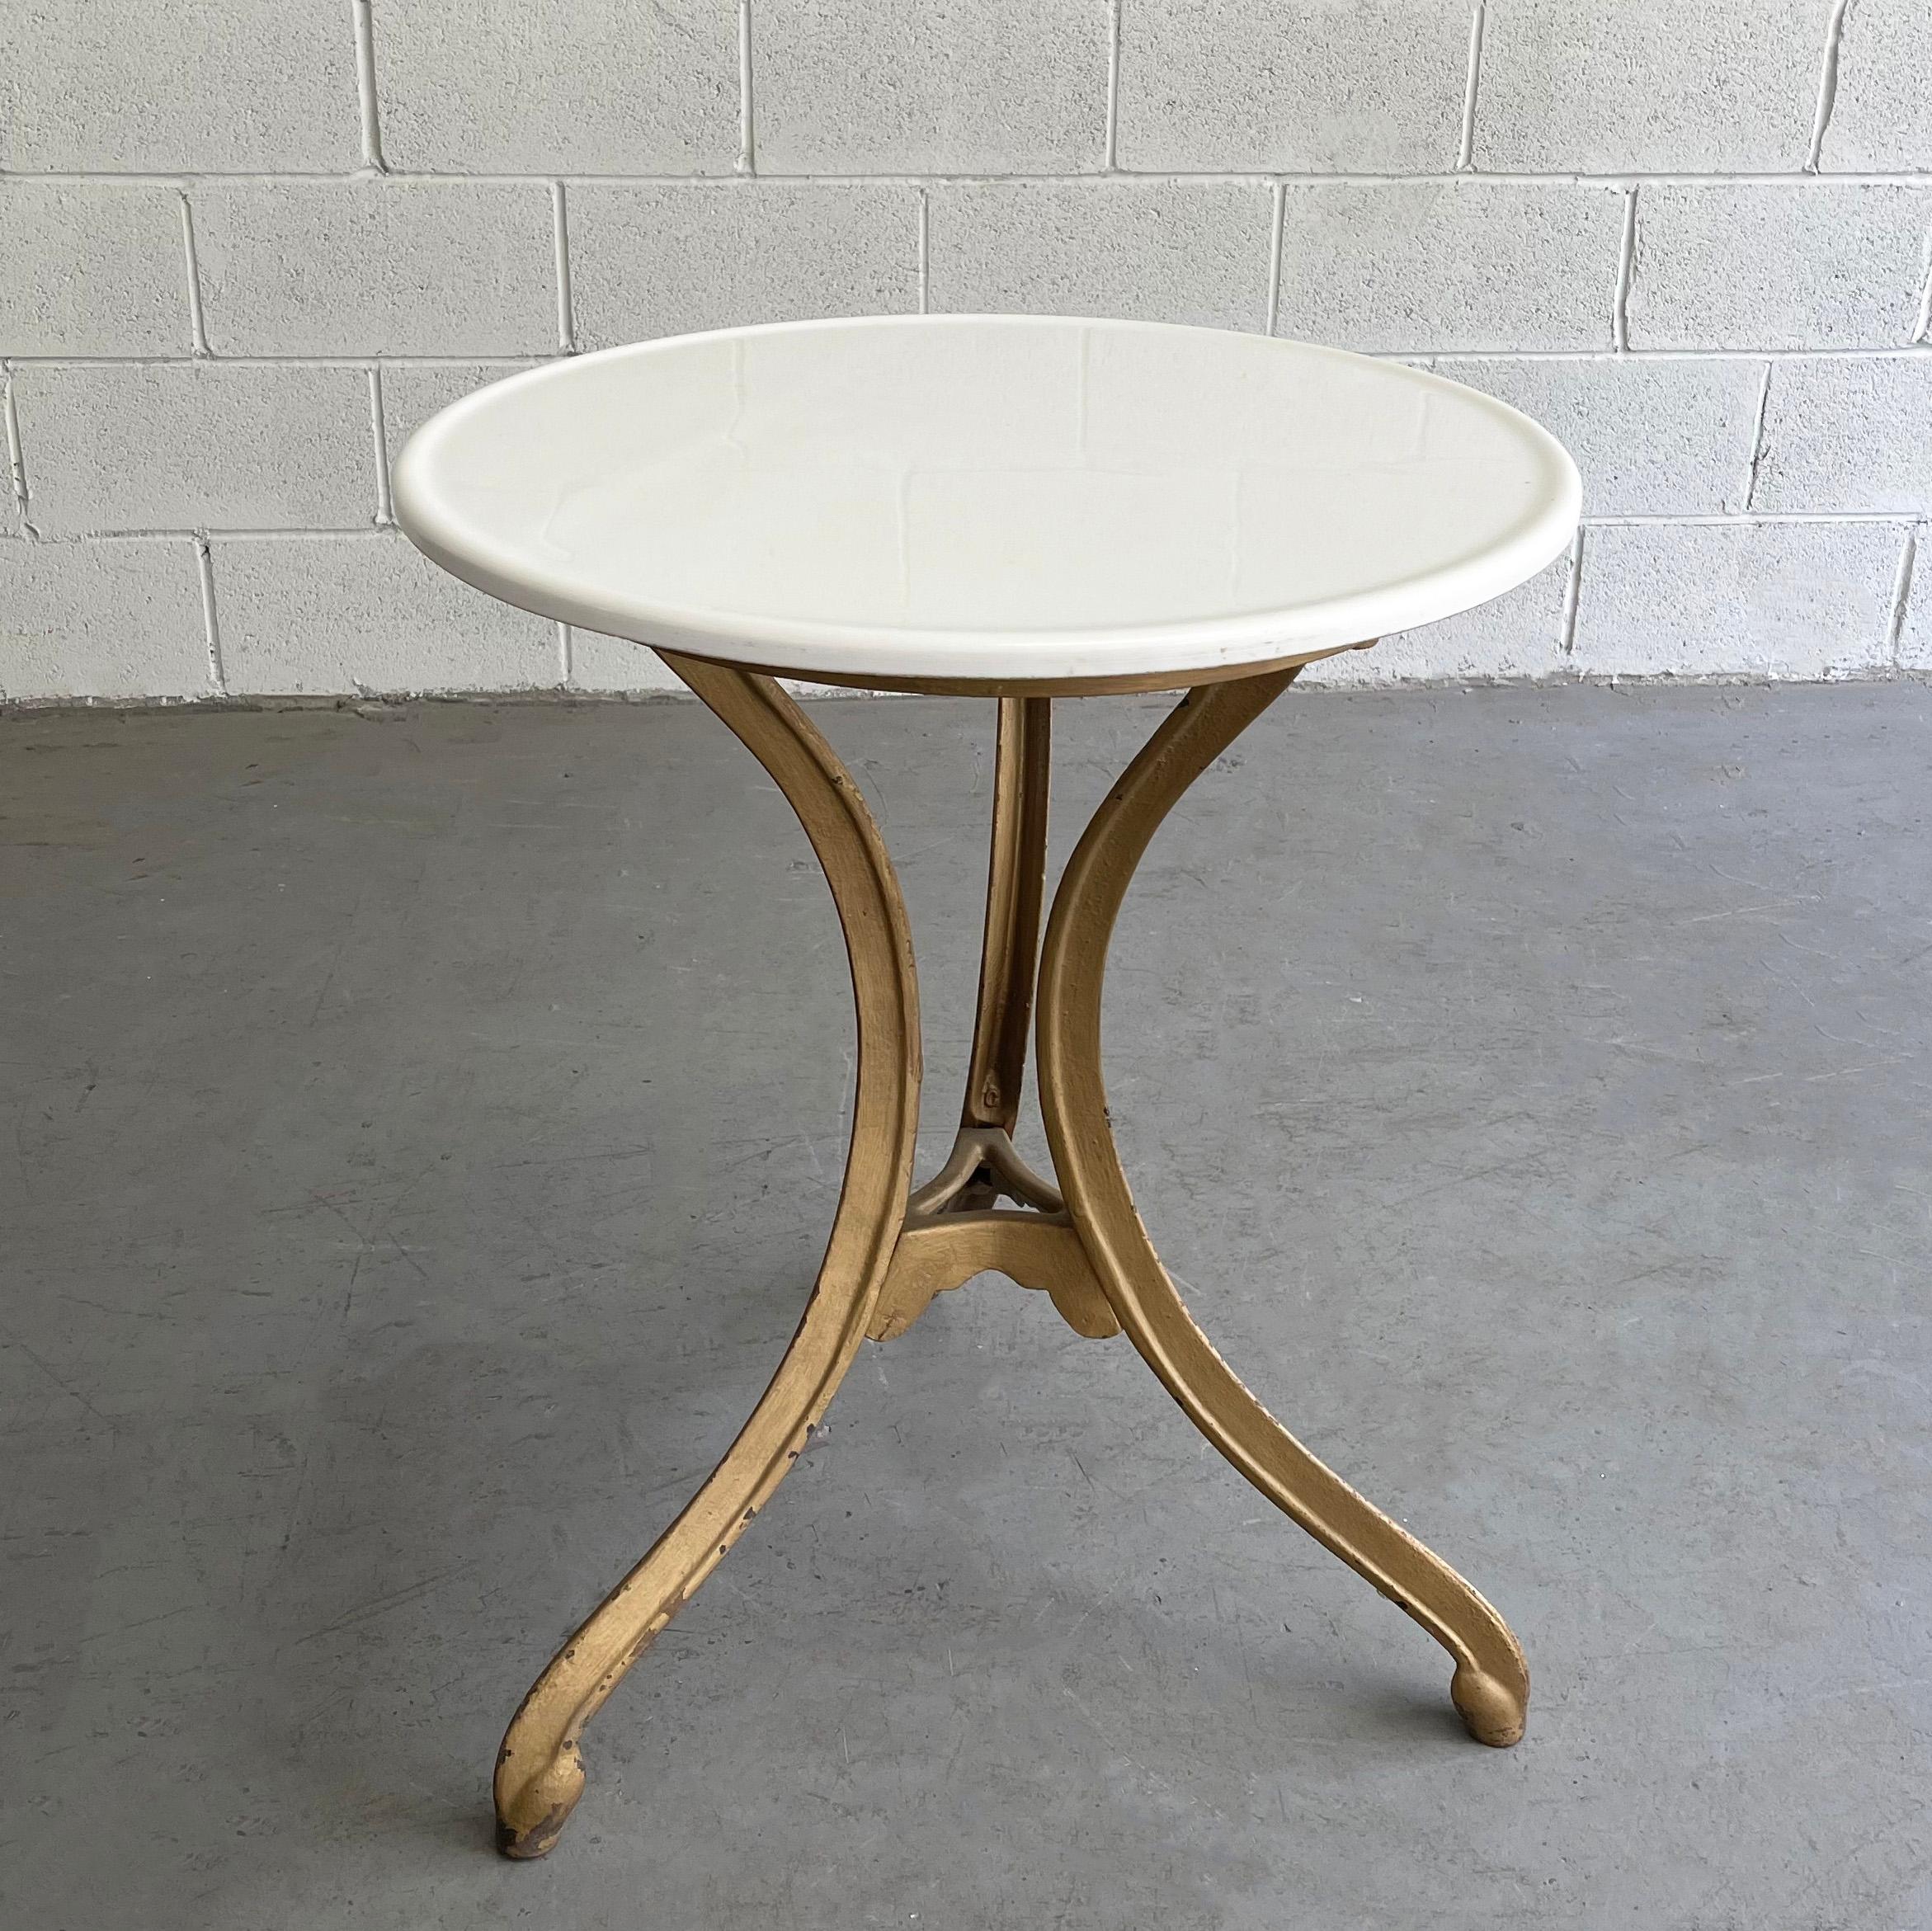 Early 20th century, café bristro table features a 24 inch round, white Vitrolite glass top with raised edge and elegant, painted cast iron base.